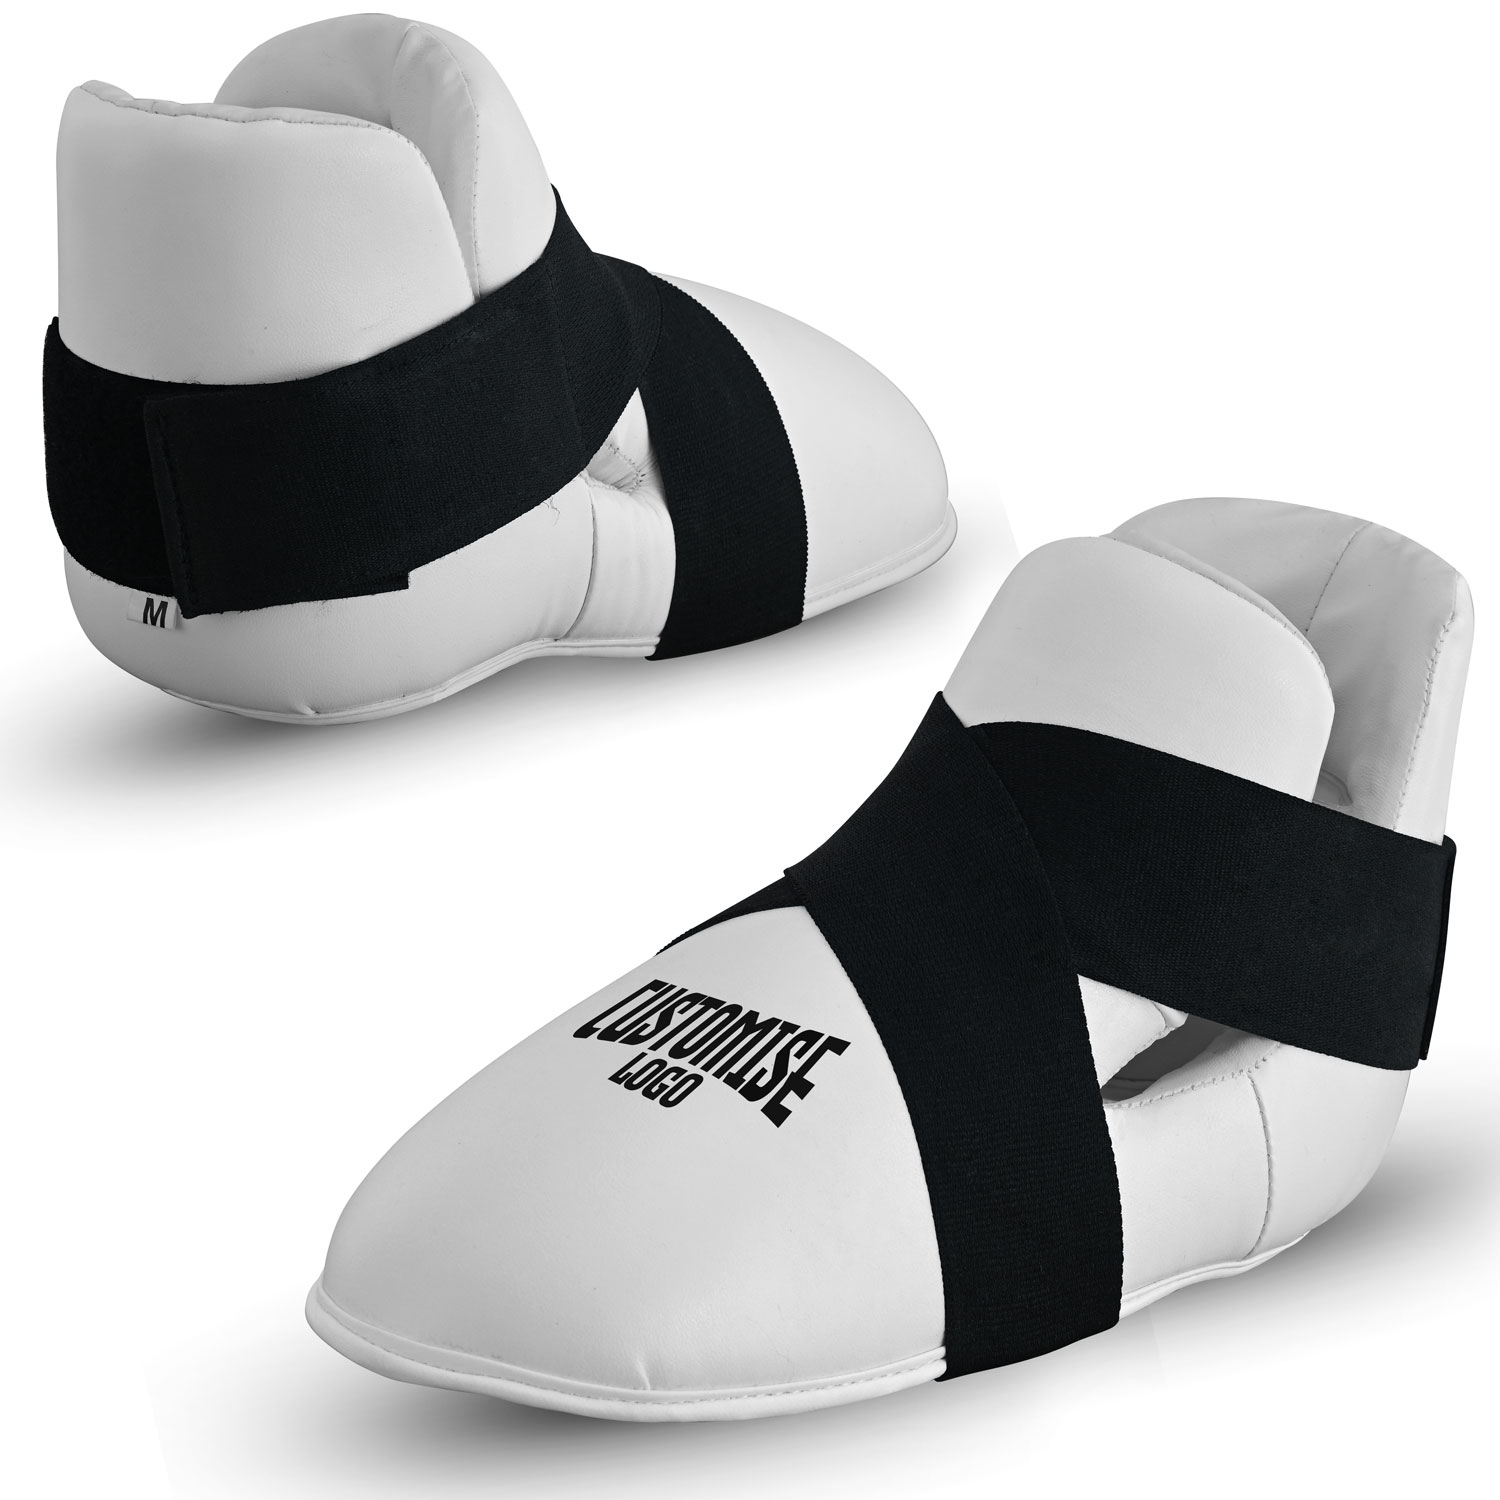 KICKBOXING FOOTGUARDS CUSTOMISED COLOURS AND SIZES ALONG WITH LOGO